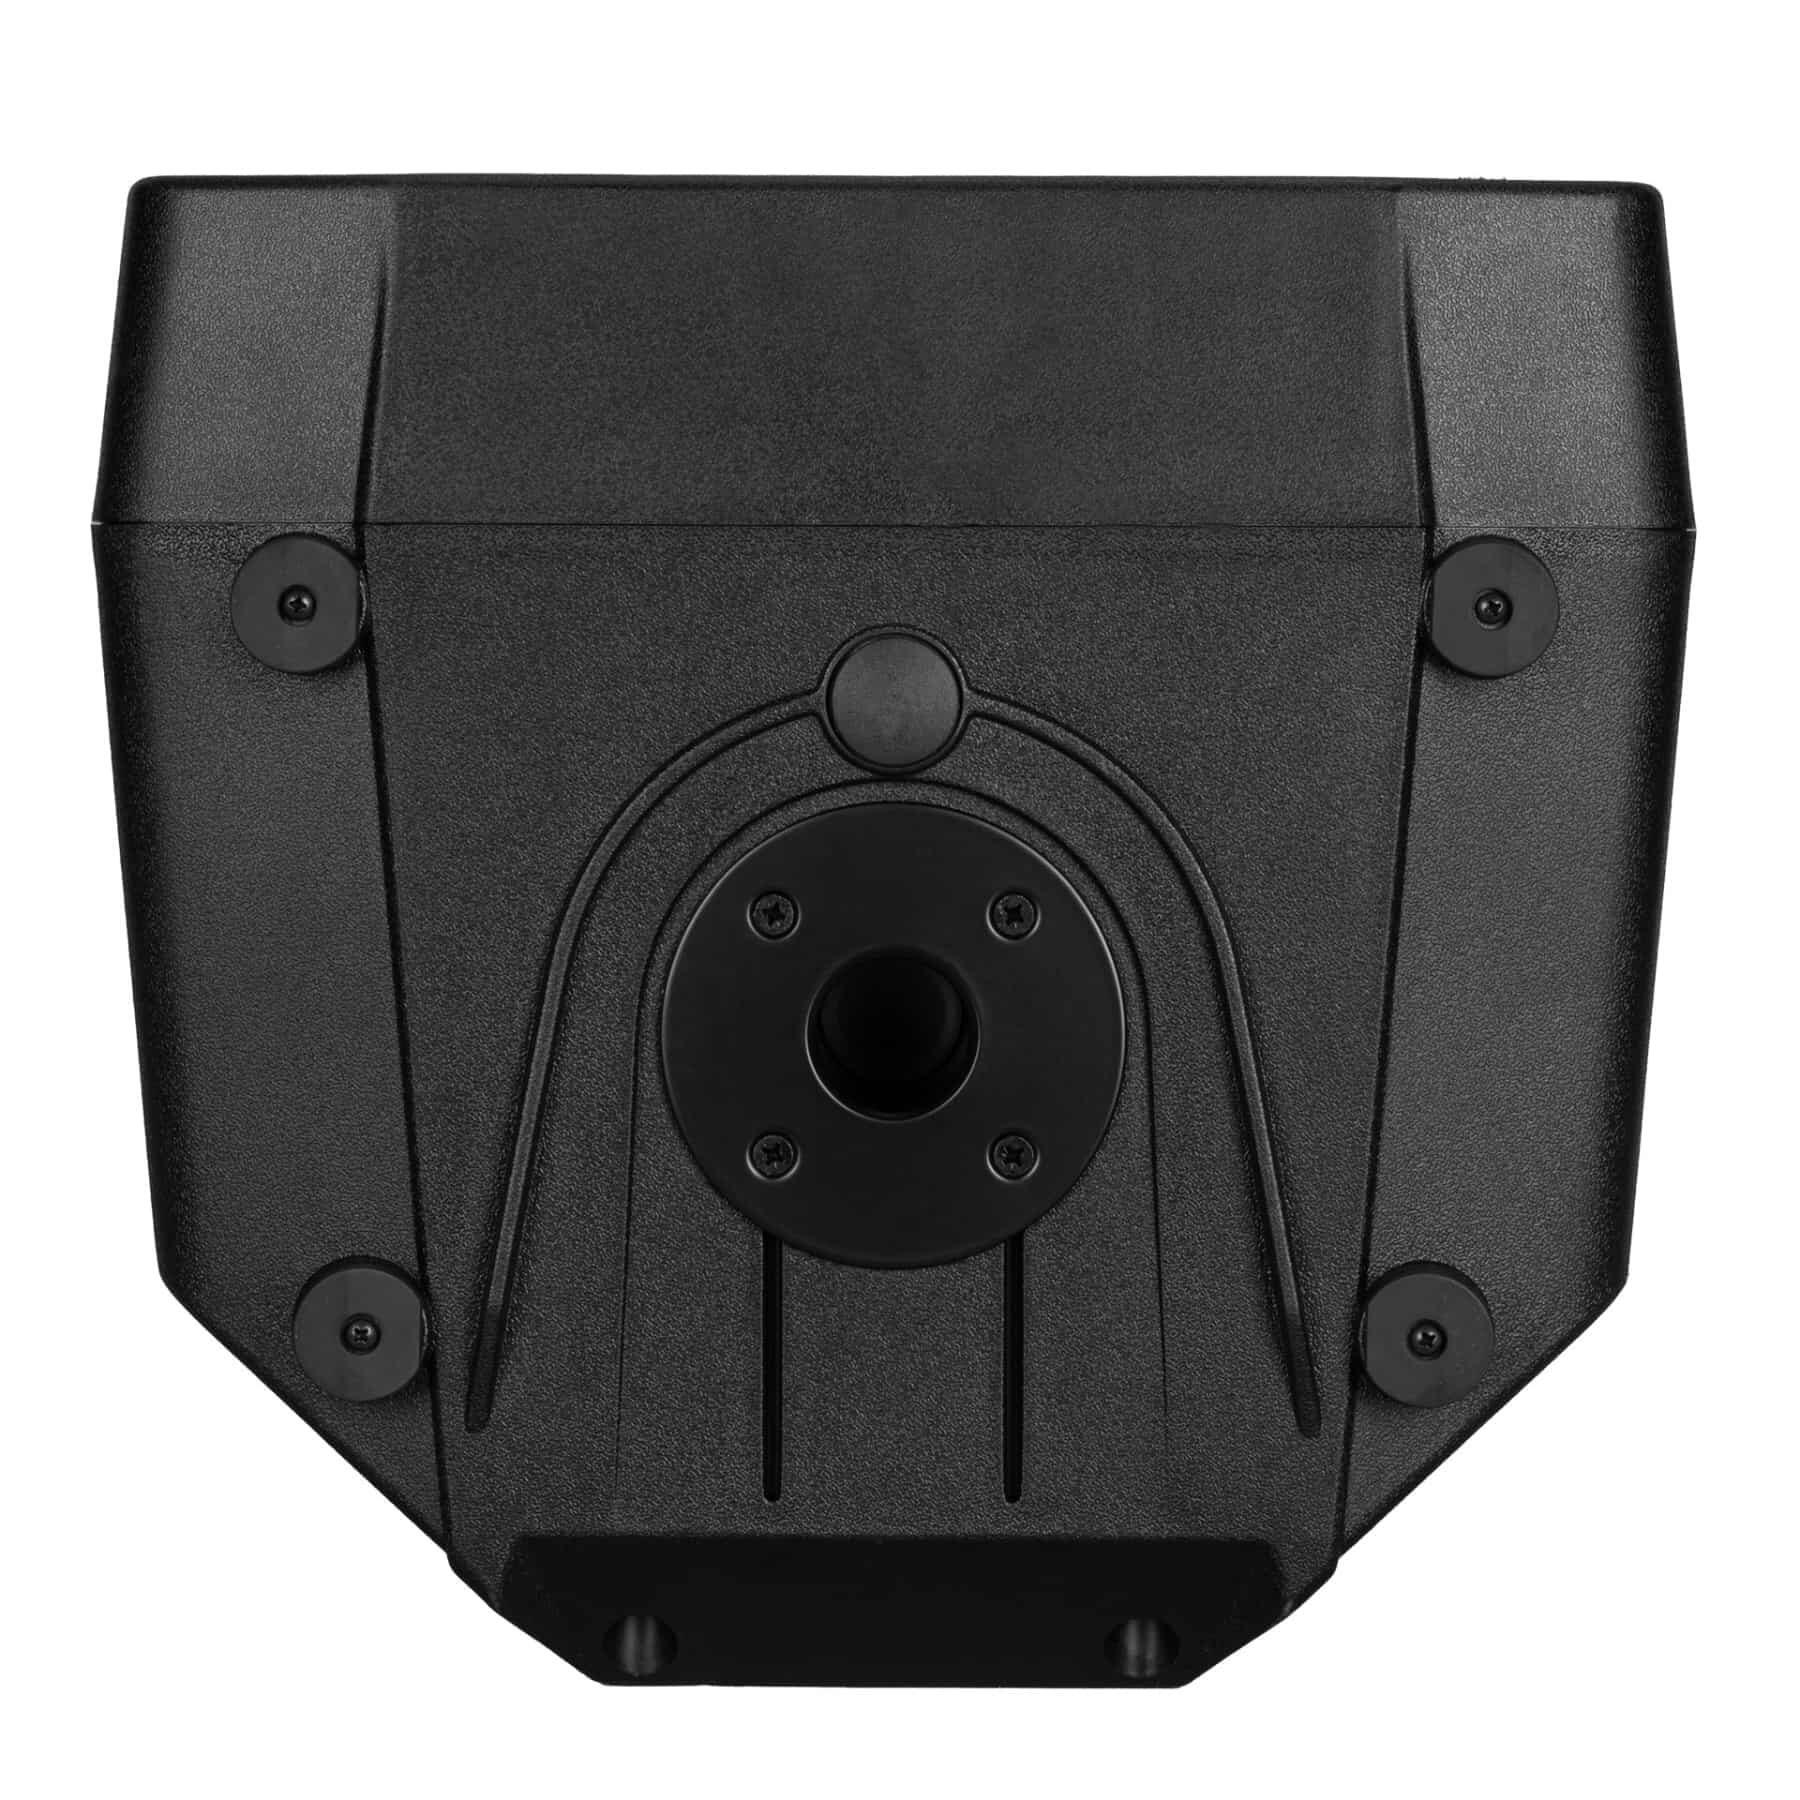 RCF ART 712-A MK5 Active Two-Way Speaker bottom